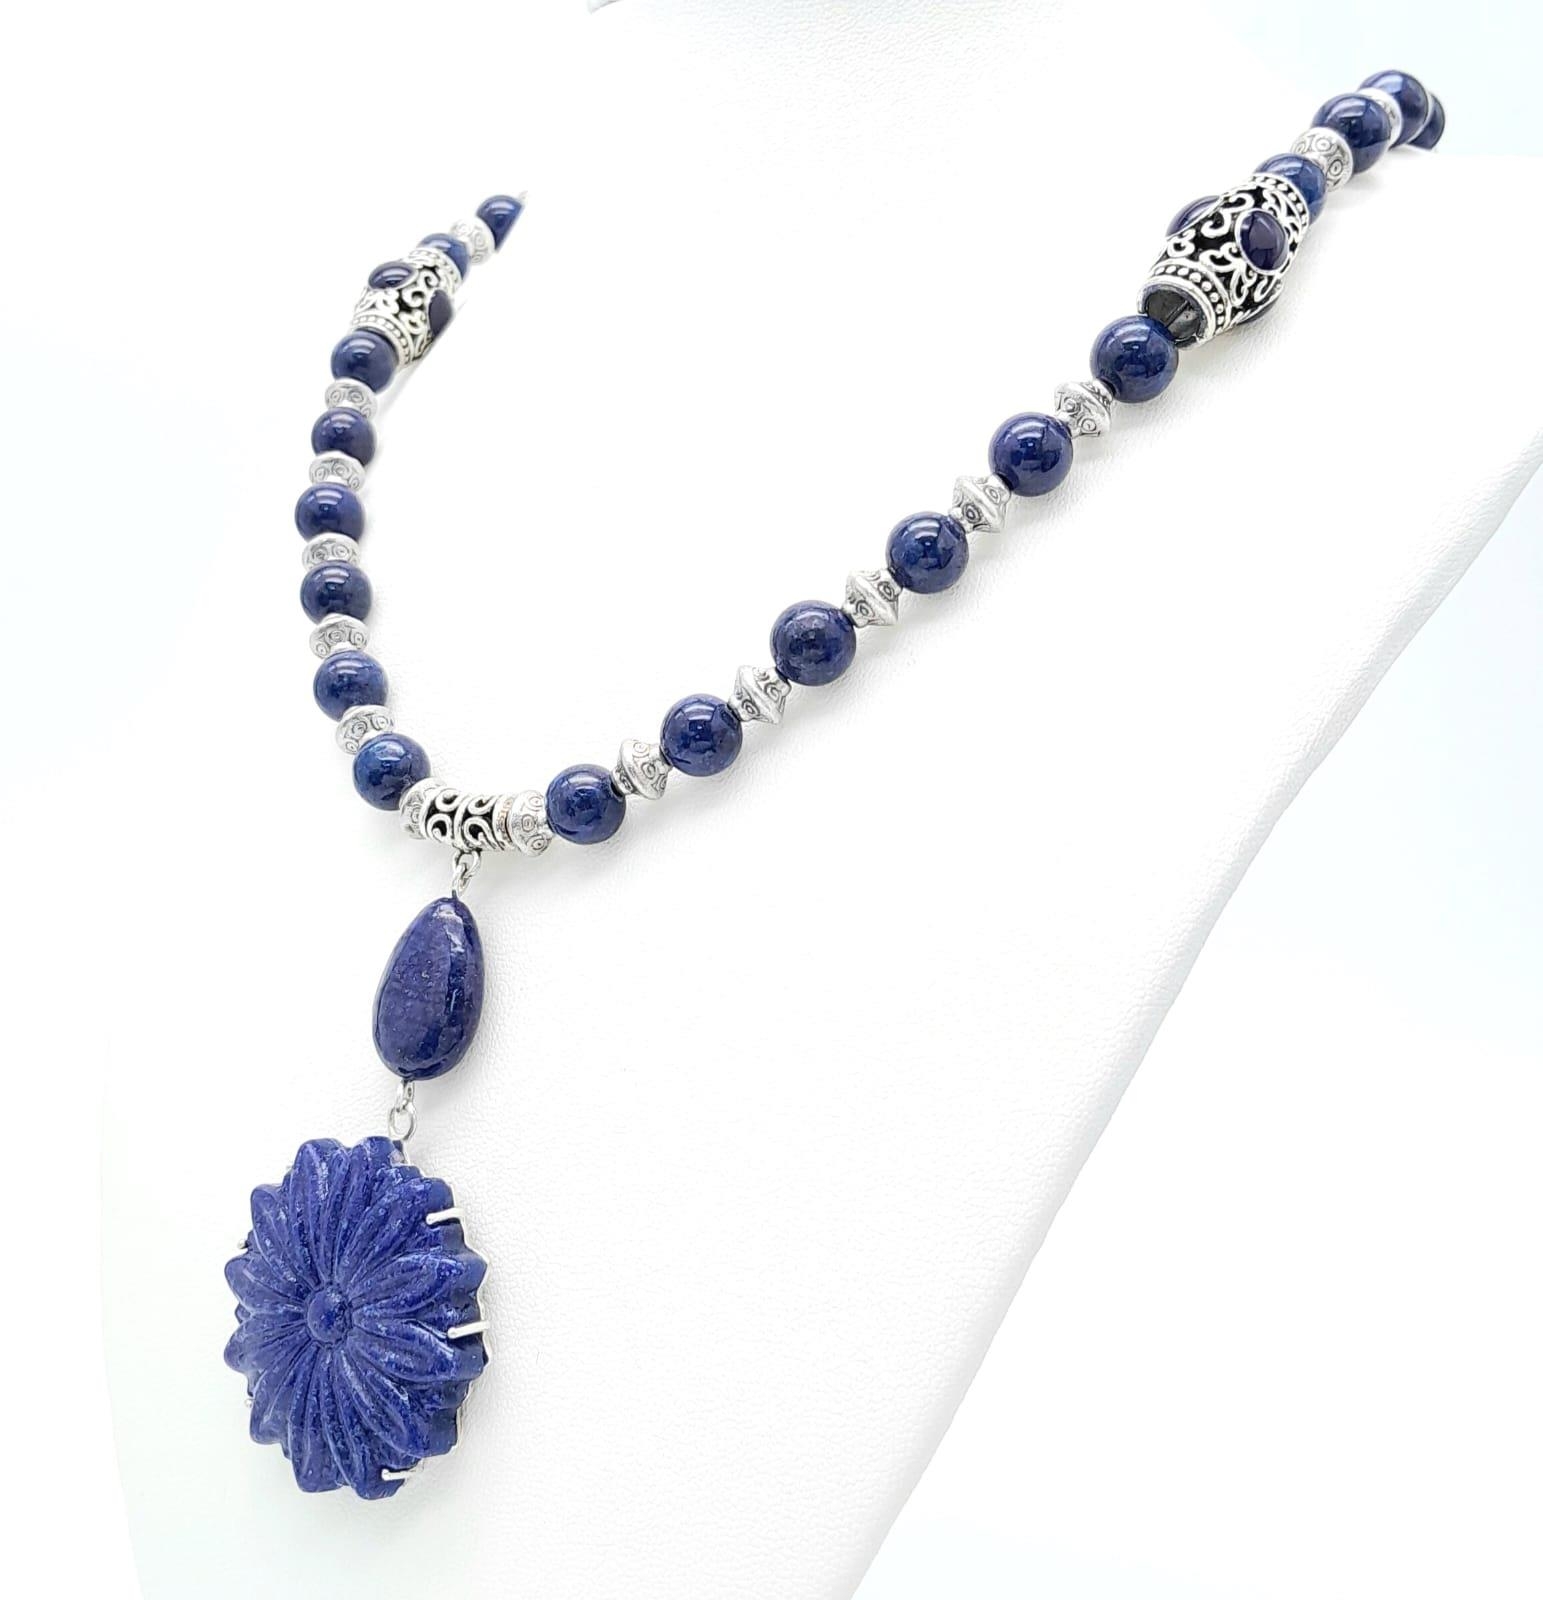 A Tibetan silver and lapis lazuli necklace and earrings set with large, carved, flower shaped discs. - Image 3 of 5